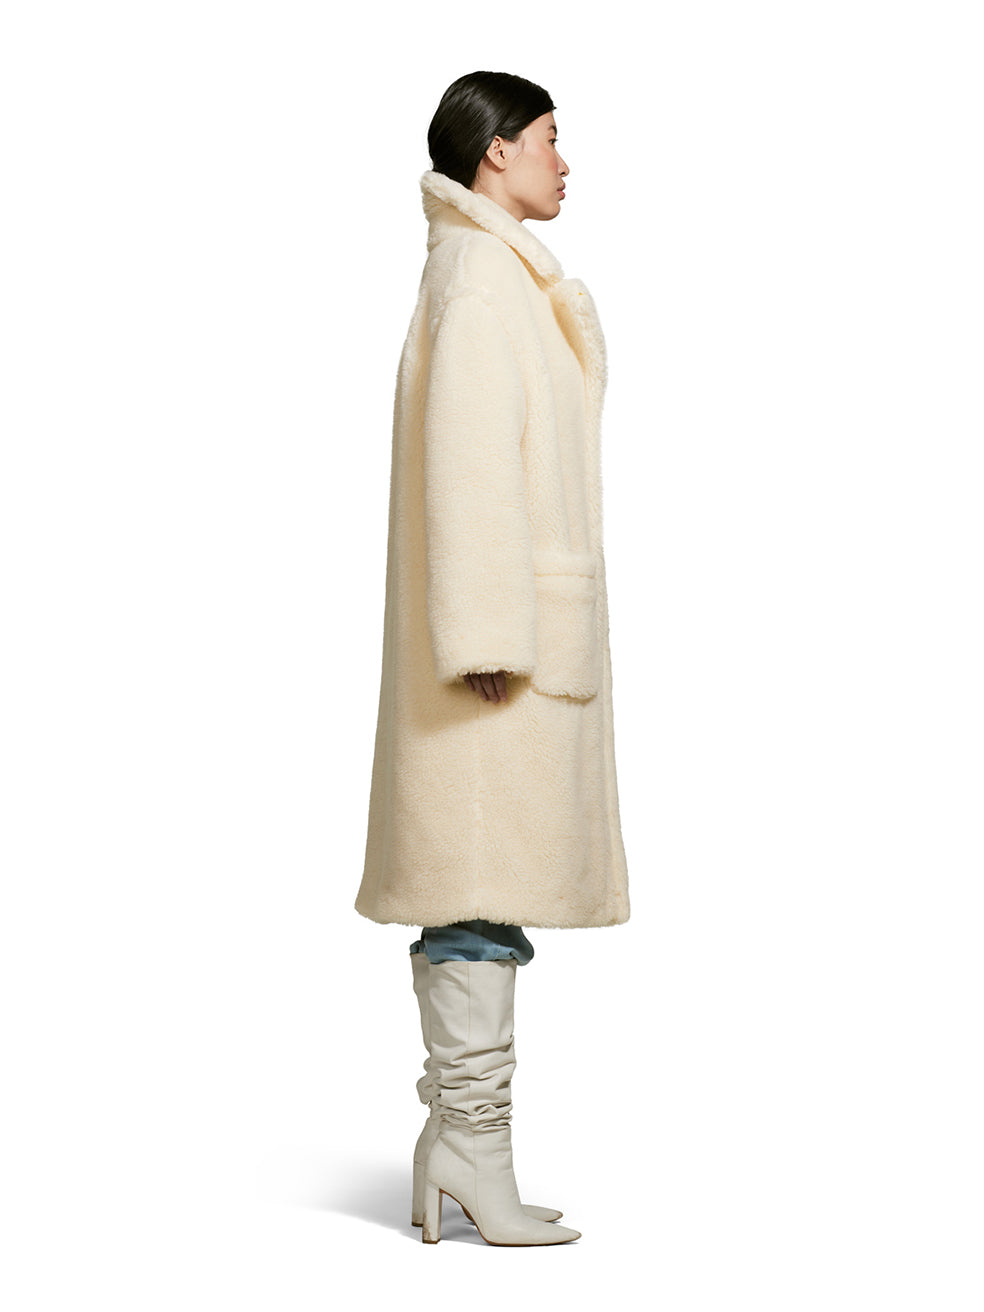 Female model wearing a teddy-inspired faux-fur sherpa shell in cream color on a white background from the side.